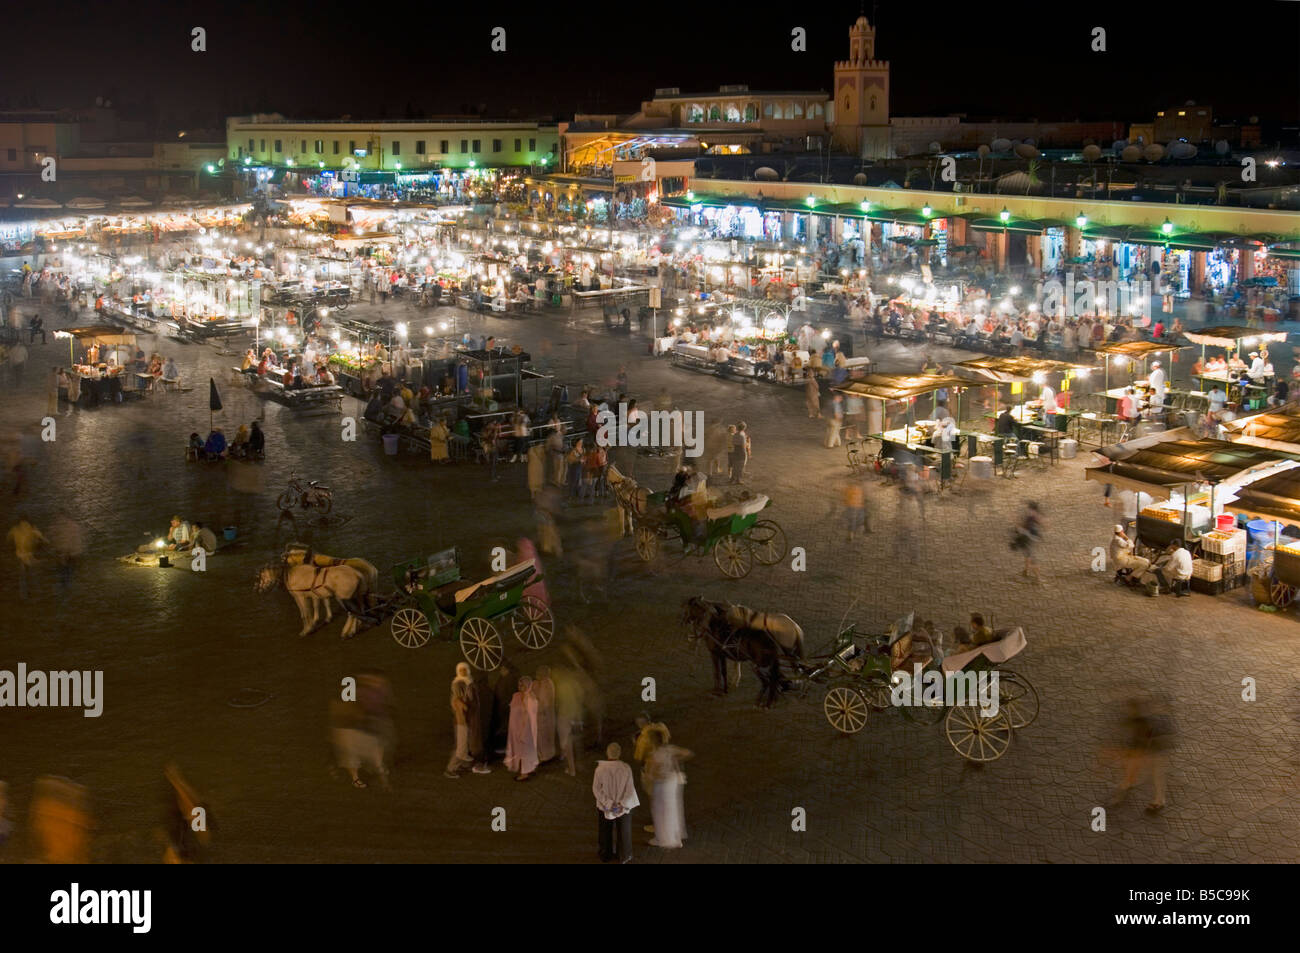 A wide angle aerial view of the busy Djemaa El Fna in Marrakesh at night with slow shutter speed for motion blur. Stock Photo